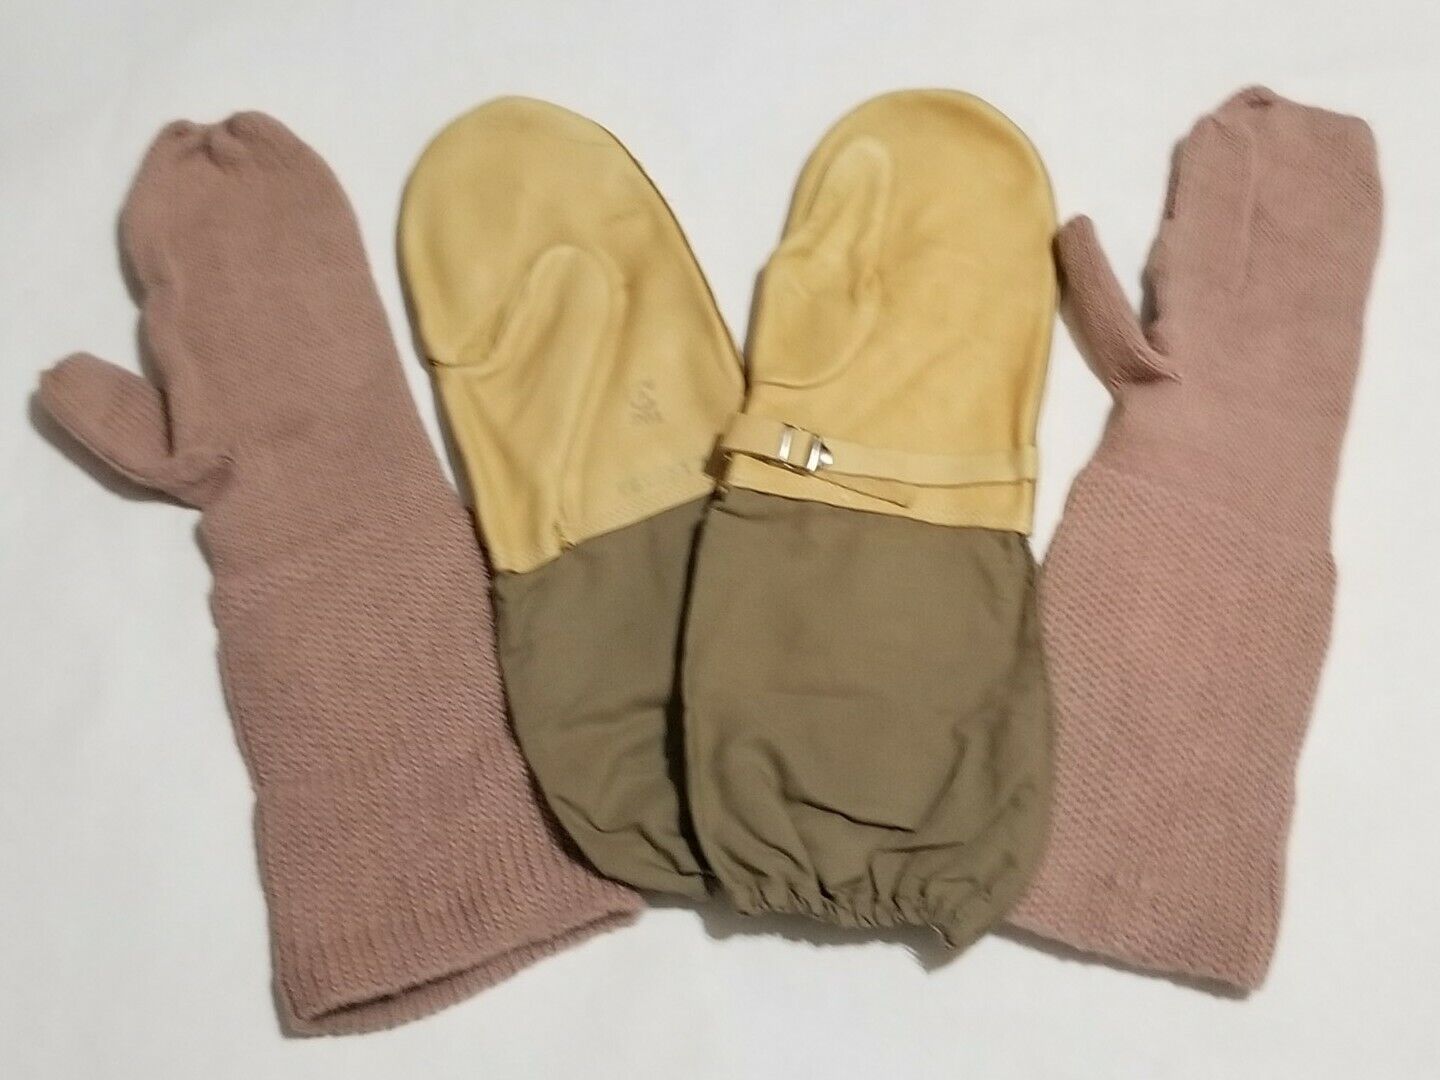 Canadian Military Trigger Finger Mittens And Inserts Unissued Surplus Size Large